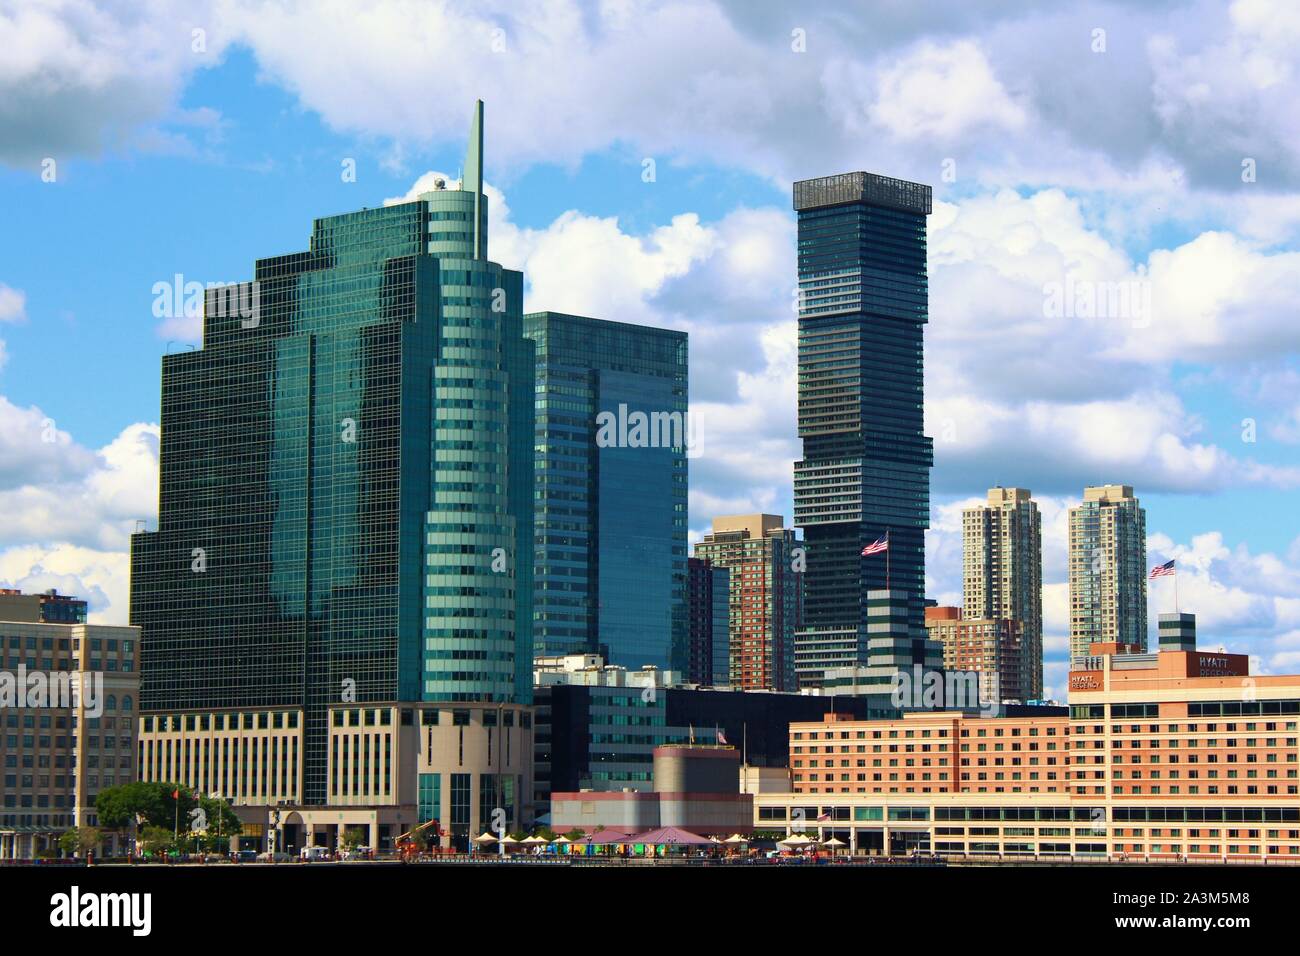 View from the Hudson River of some of the buildings that make up the skyline of Jersey City, which is opposite the skyline of Lower Manhattan, NYC. Stock Photo